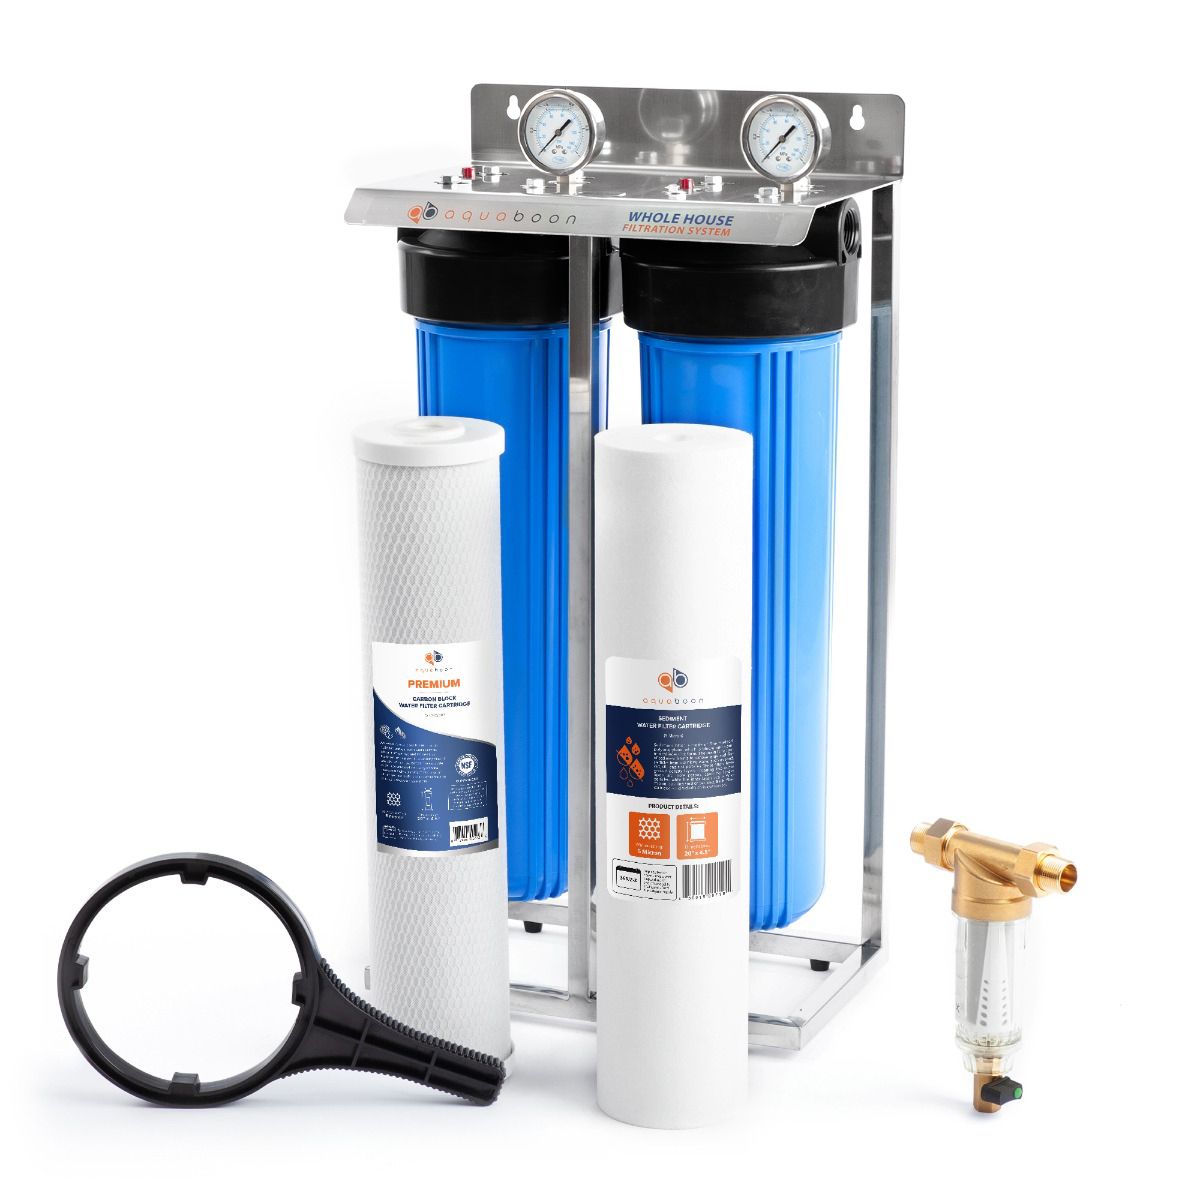 2-Stage 20" Aquaboon Whole House Water Treatment System